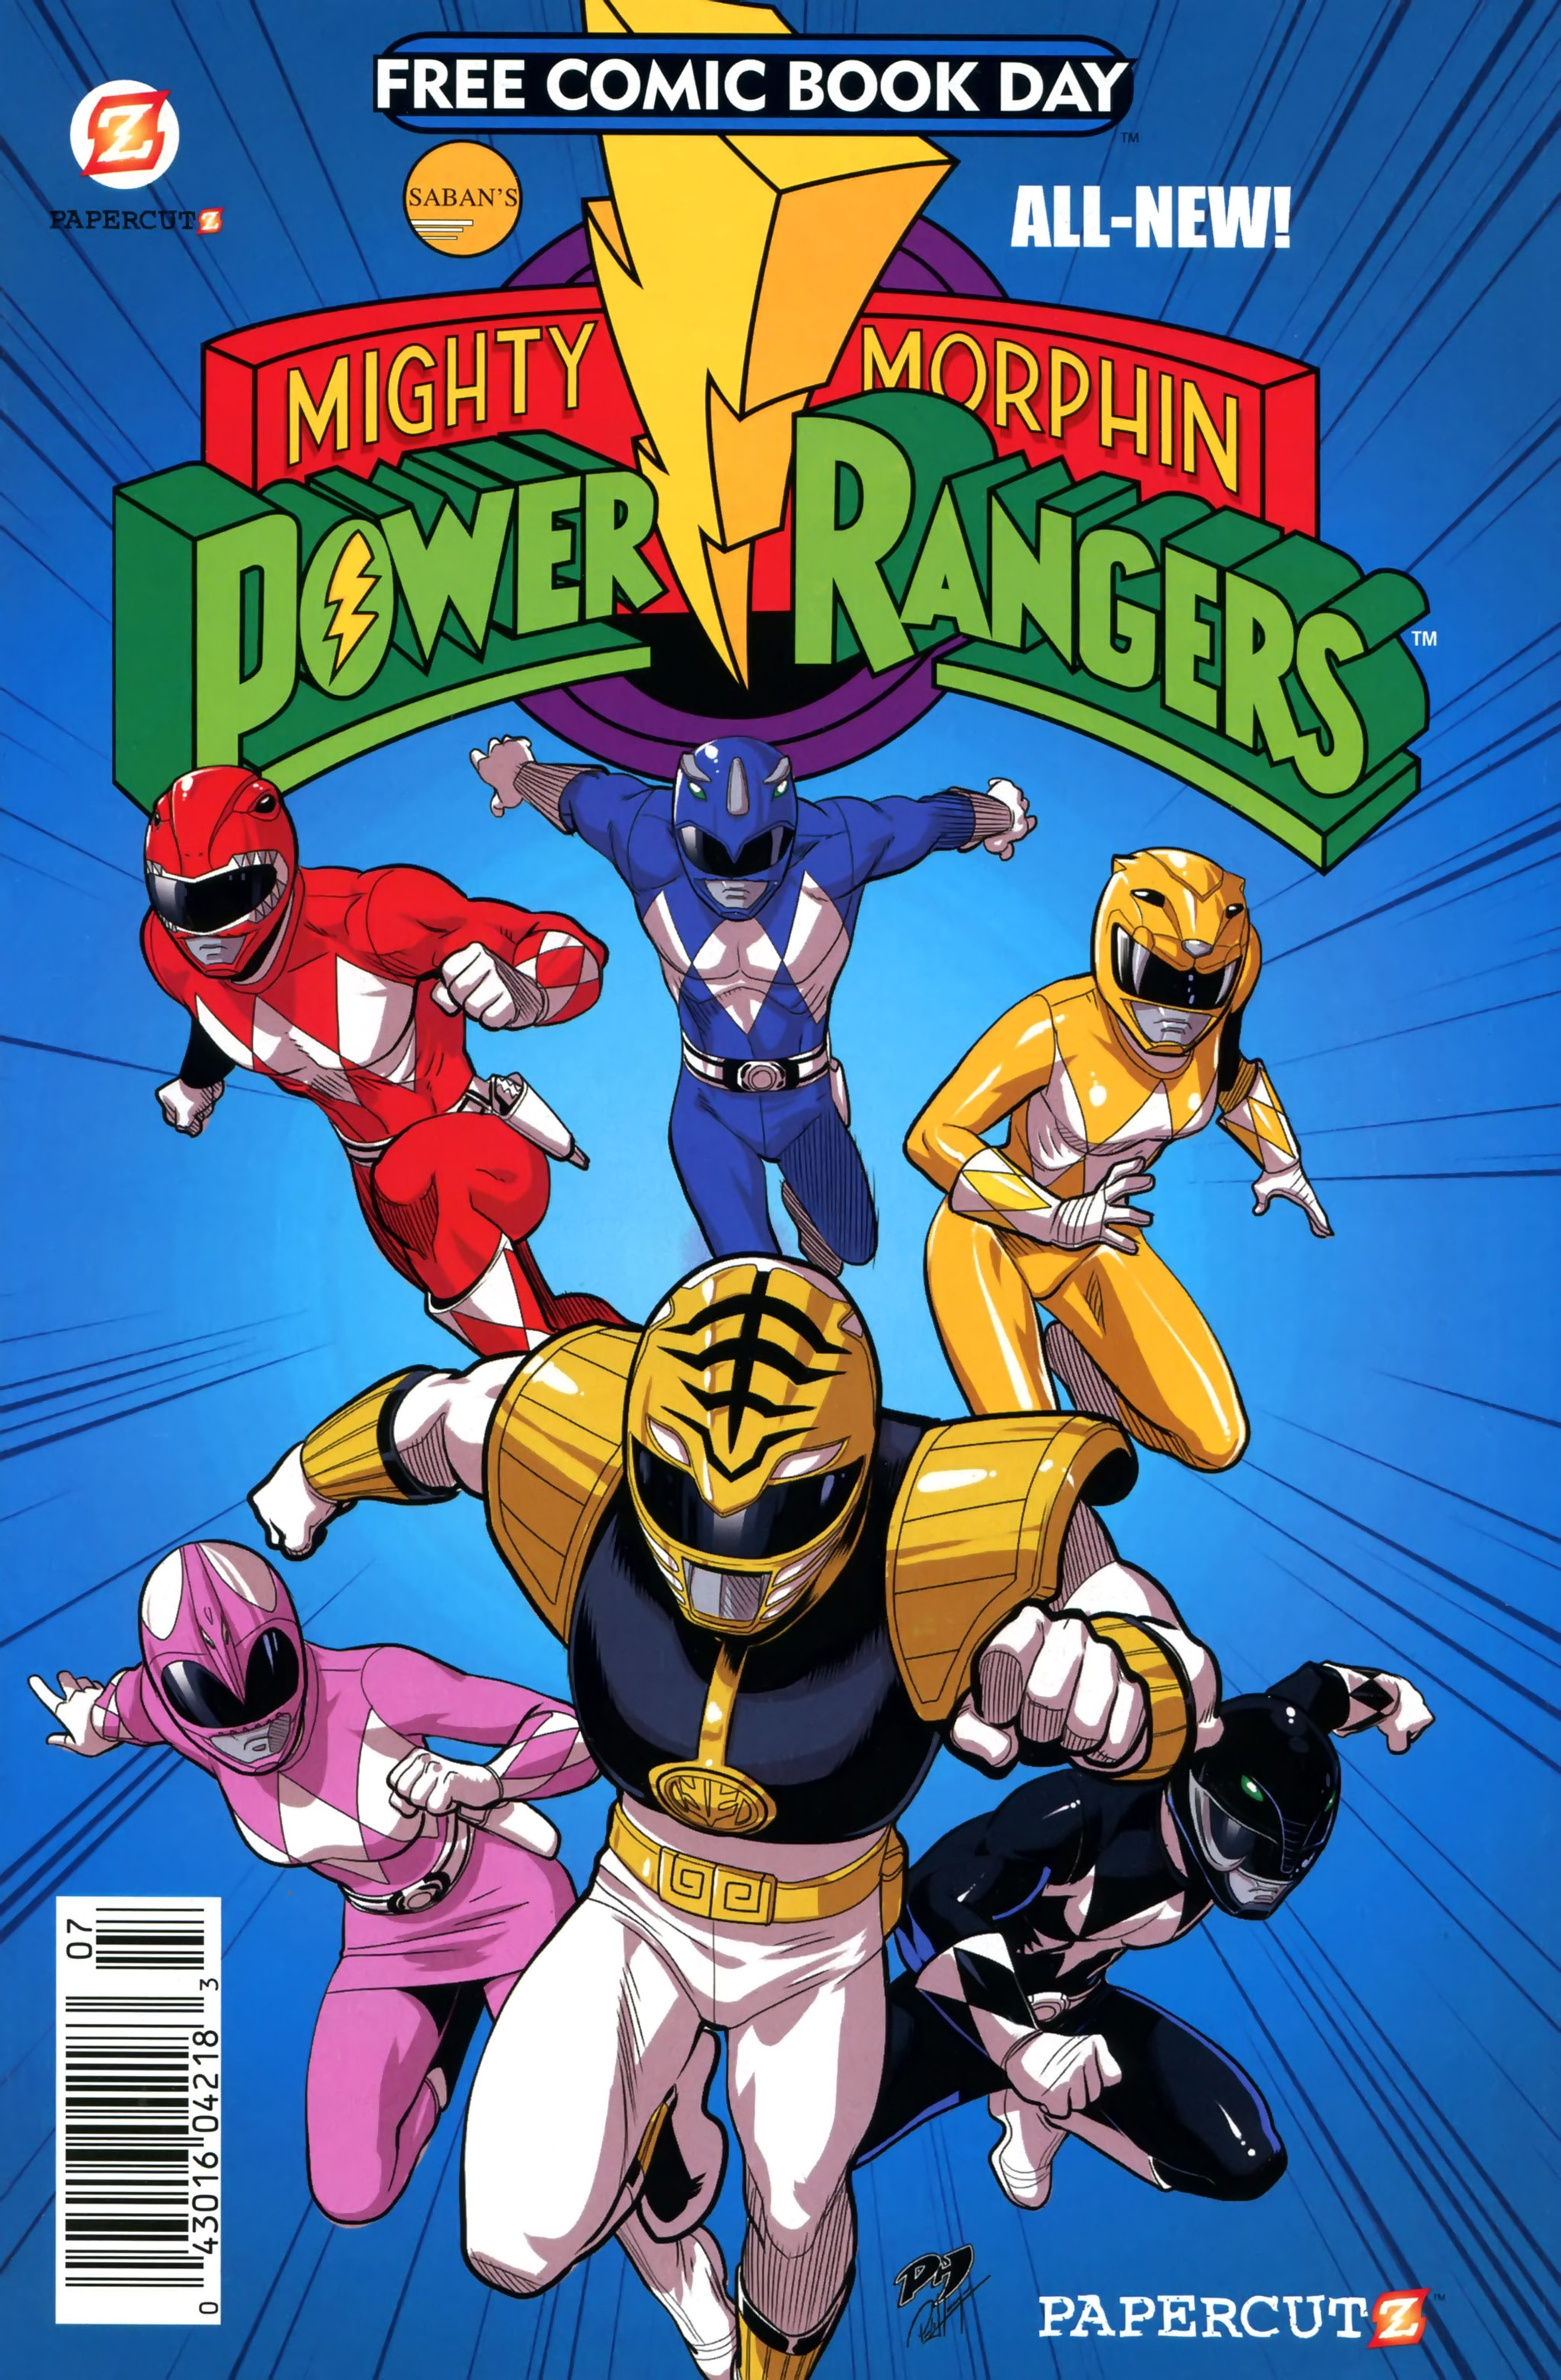 Read online Free Comic Book Day 2014 comic -  Issue # Mighty Morphin Power Rangers - 1